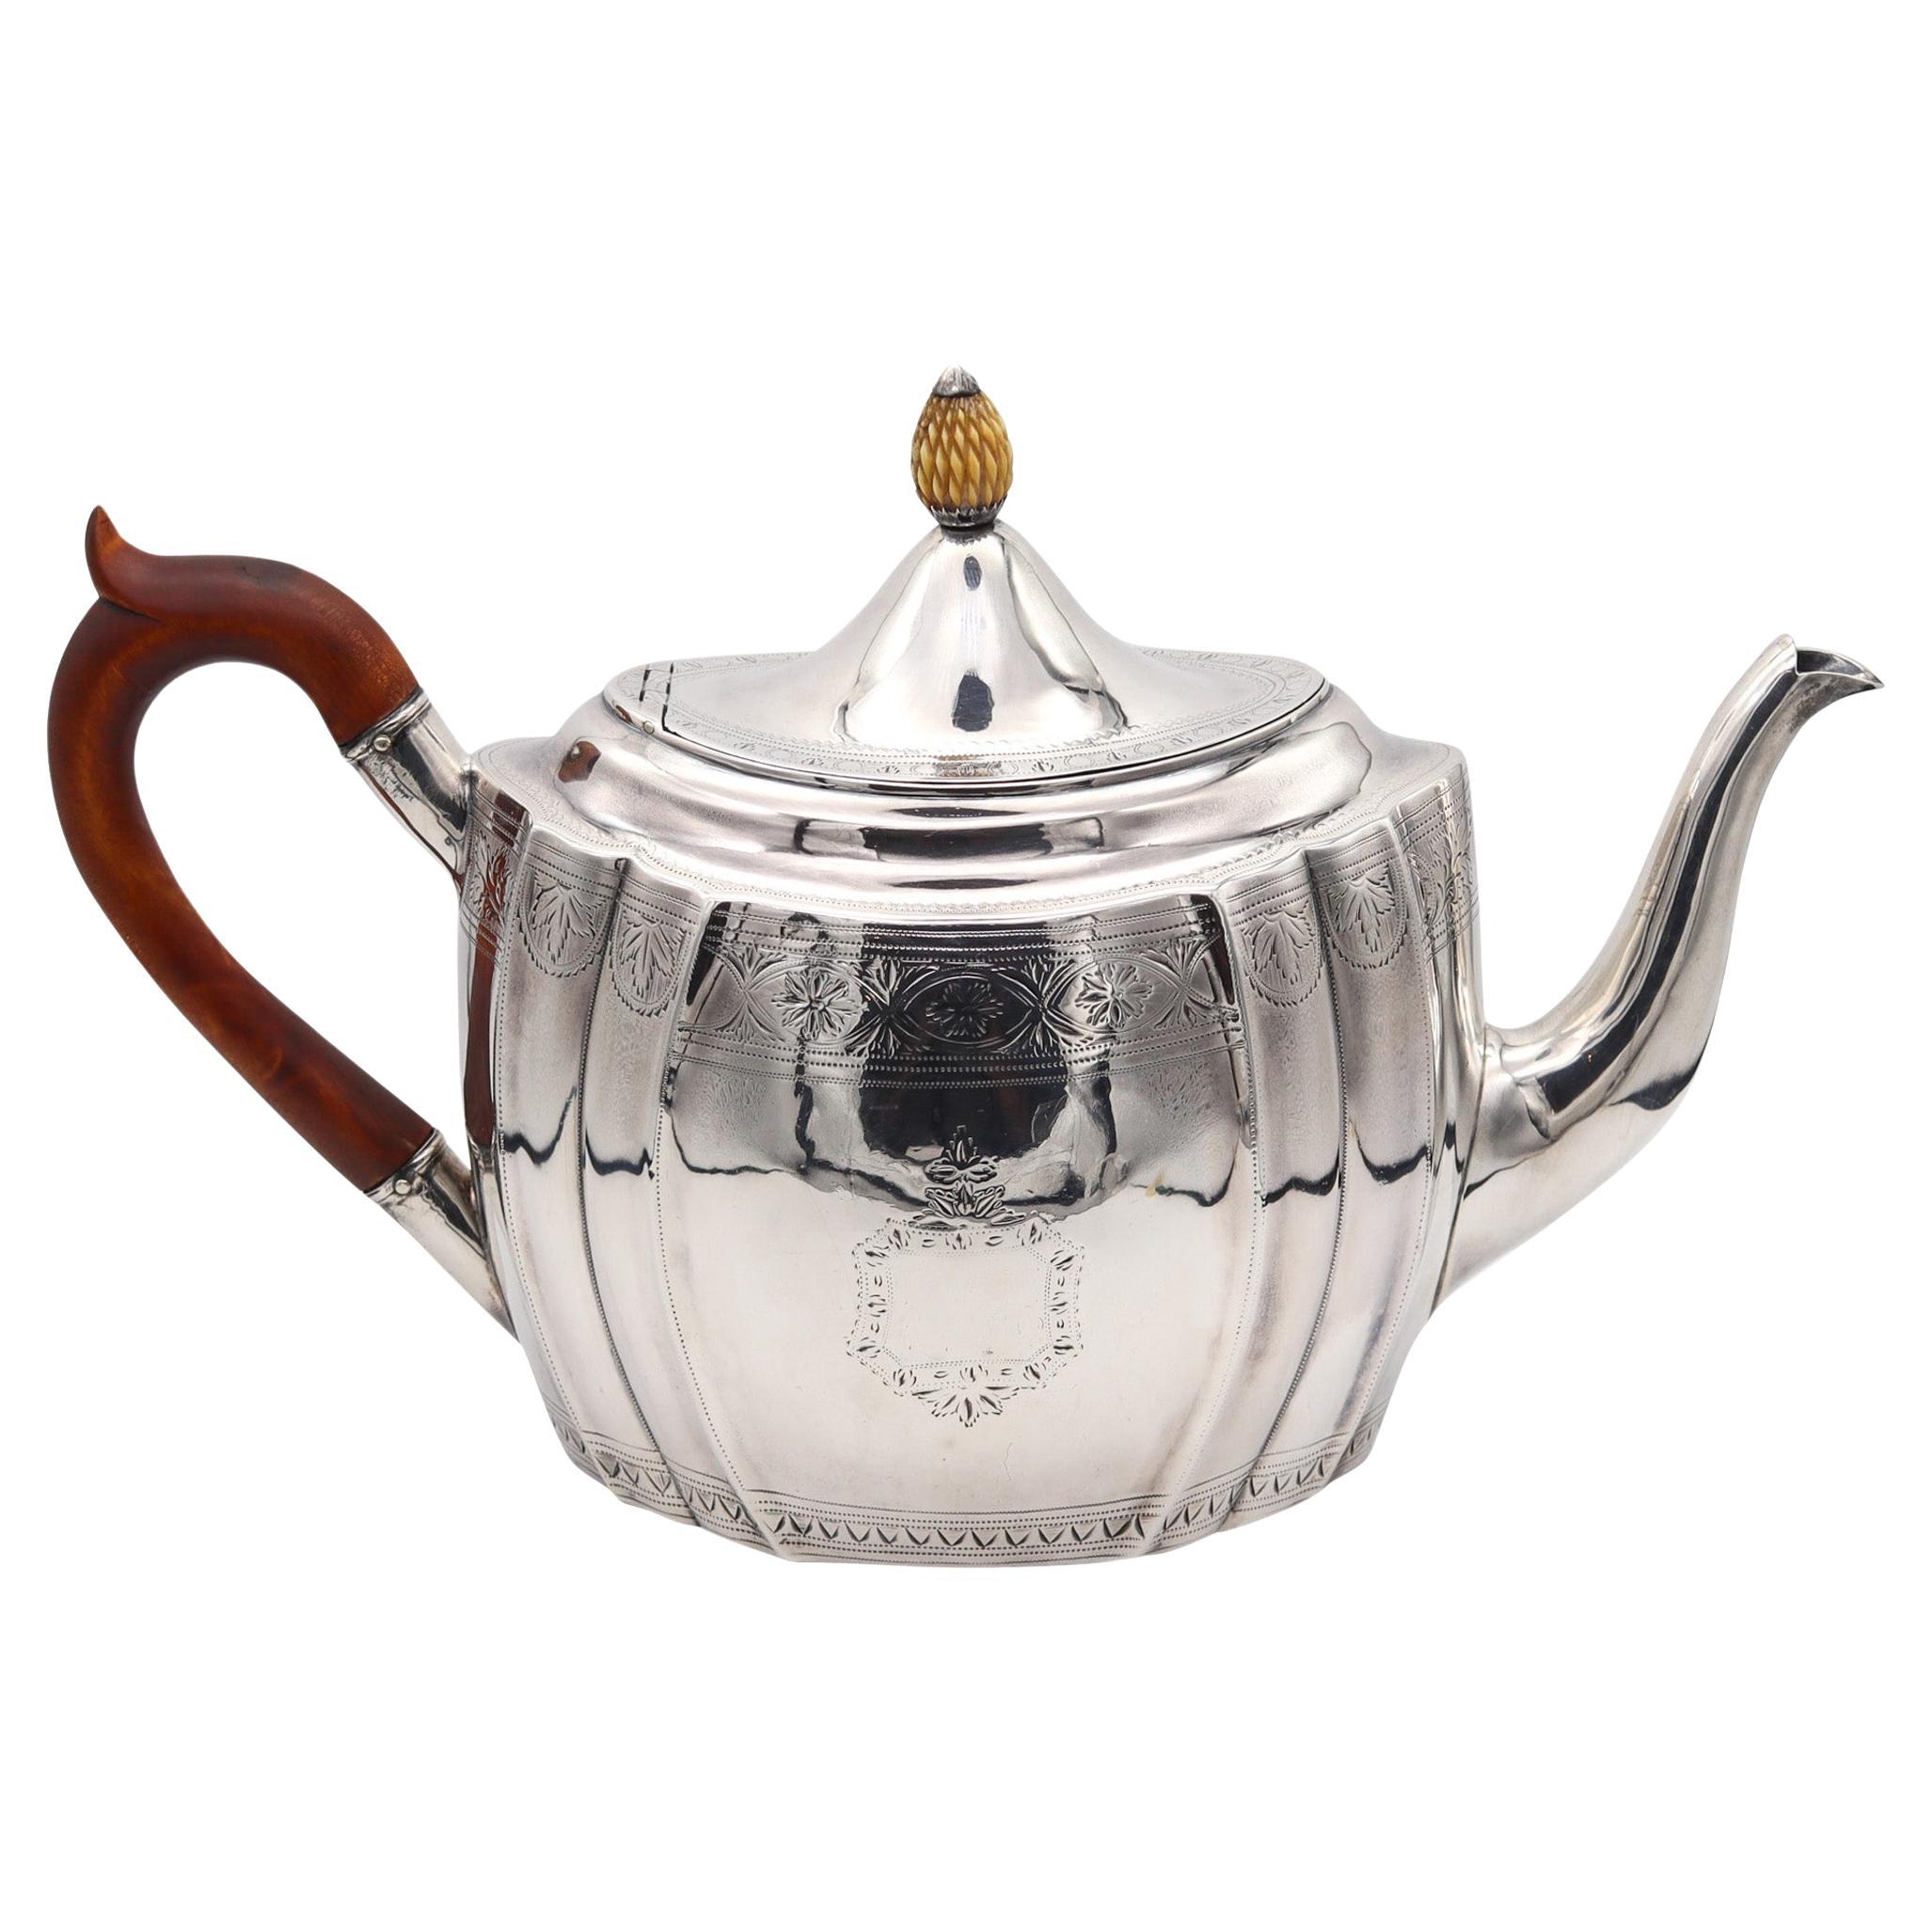 Richard Sawyer 1801 Dublin Coffee-Tea Pot In 925 Sterling Silver With Brown Wood